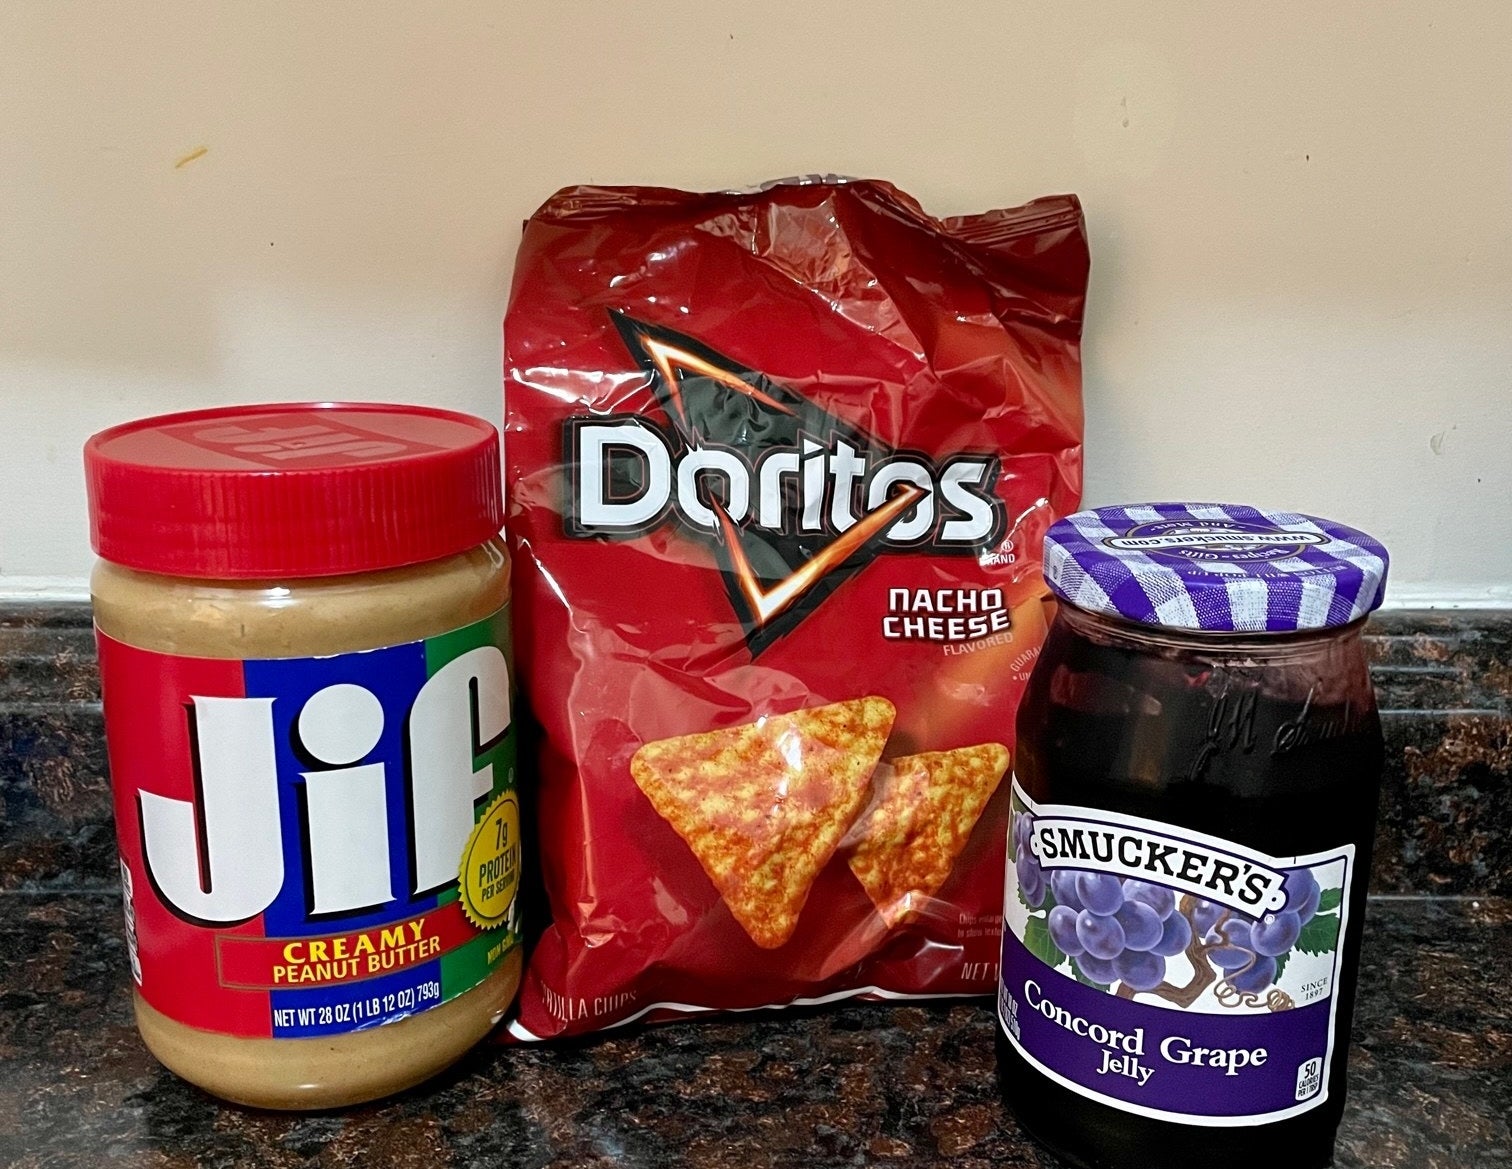 Peanut butter, Doritos, and jelly